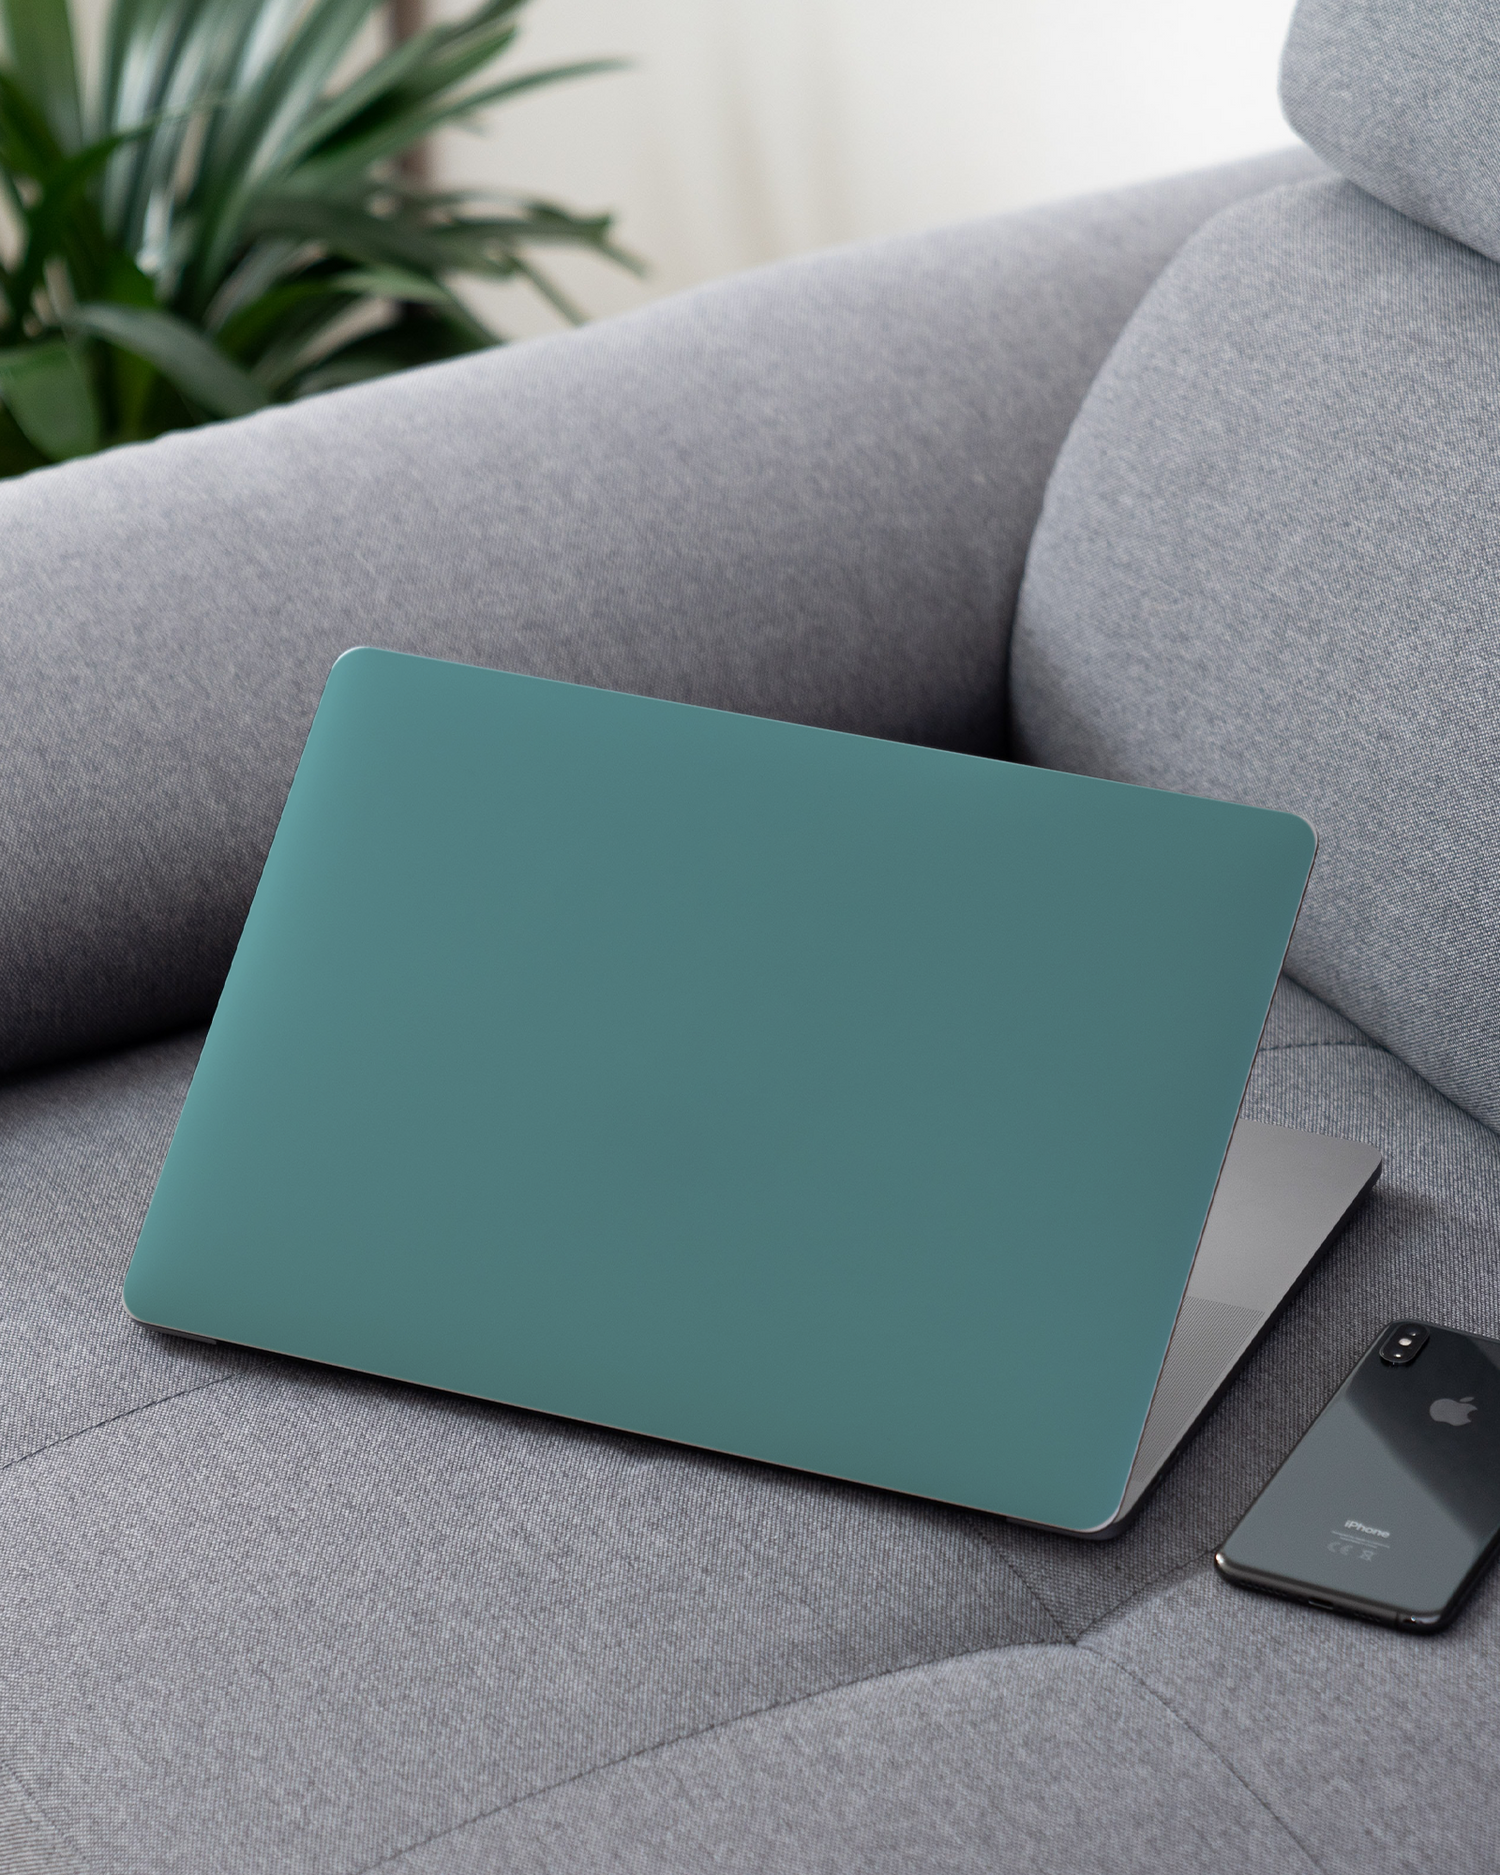 TURQUOISE Laptop Skin for 13 inch Apple MacBooks on a couch